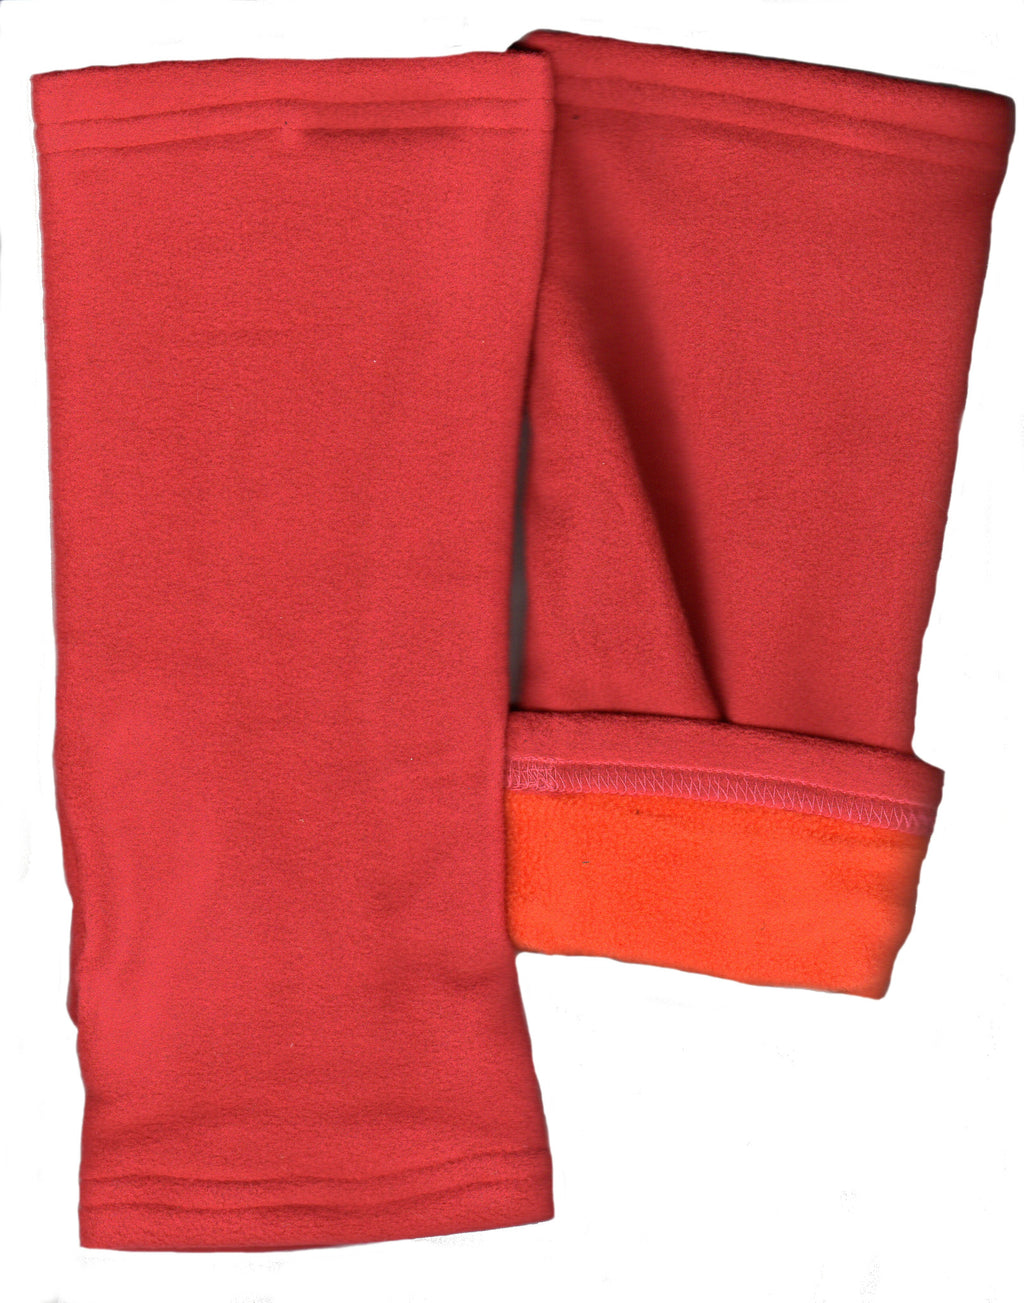 Lauer Reversible Microfleece Fingerless Gloves Stretch to fit. This is Red and Orange.